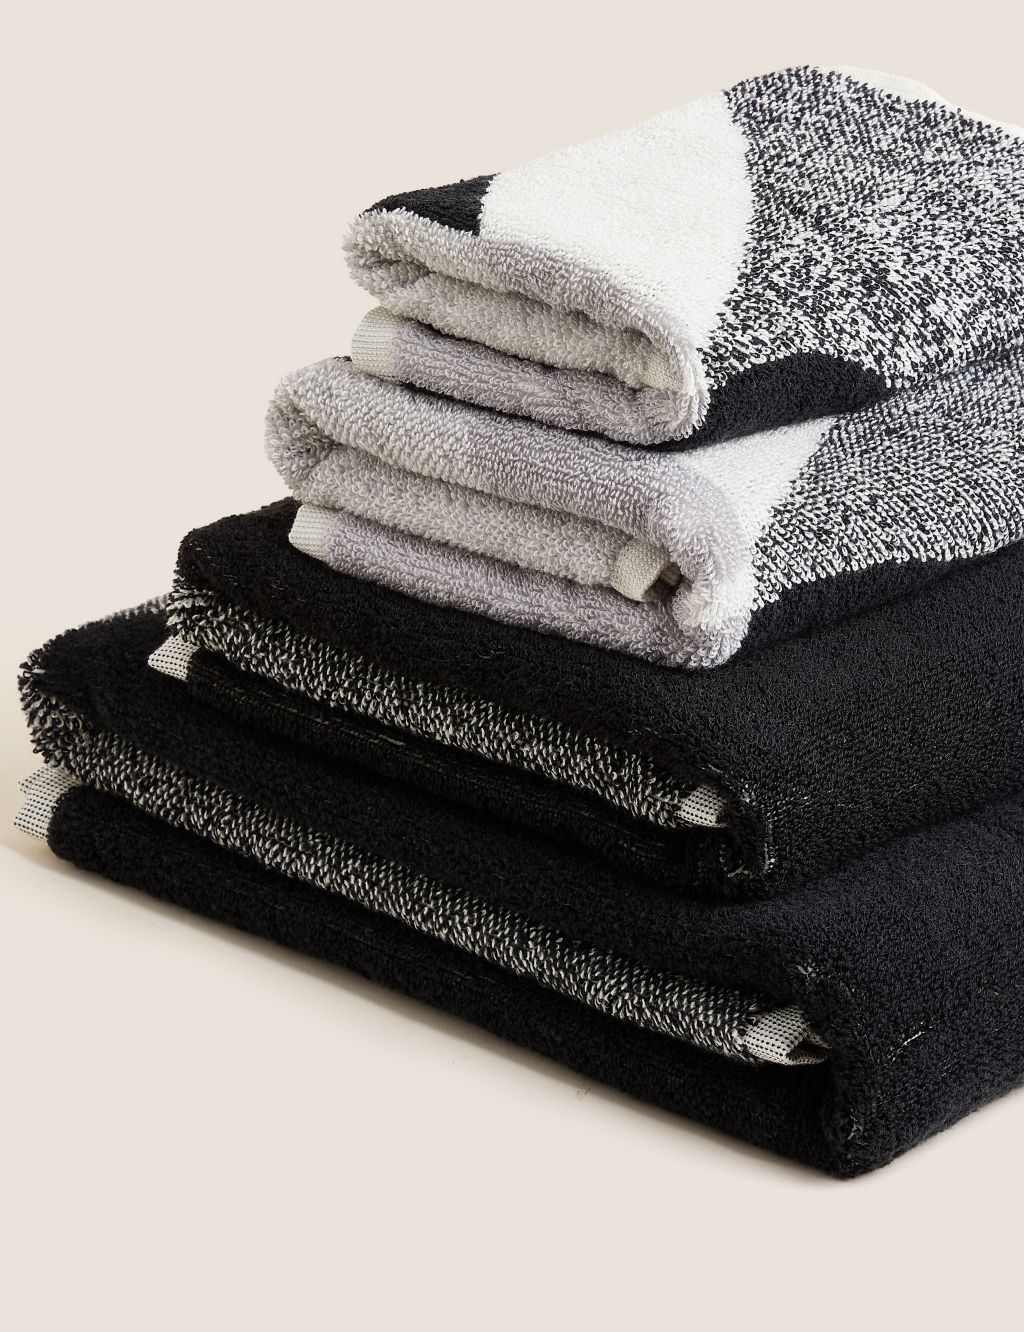 Pure Cotton Abstract Shapes Towel image 1